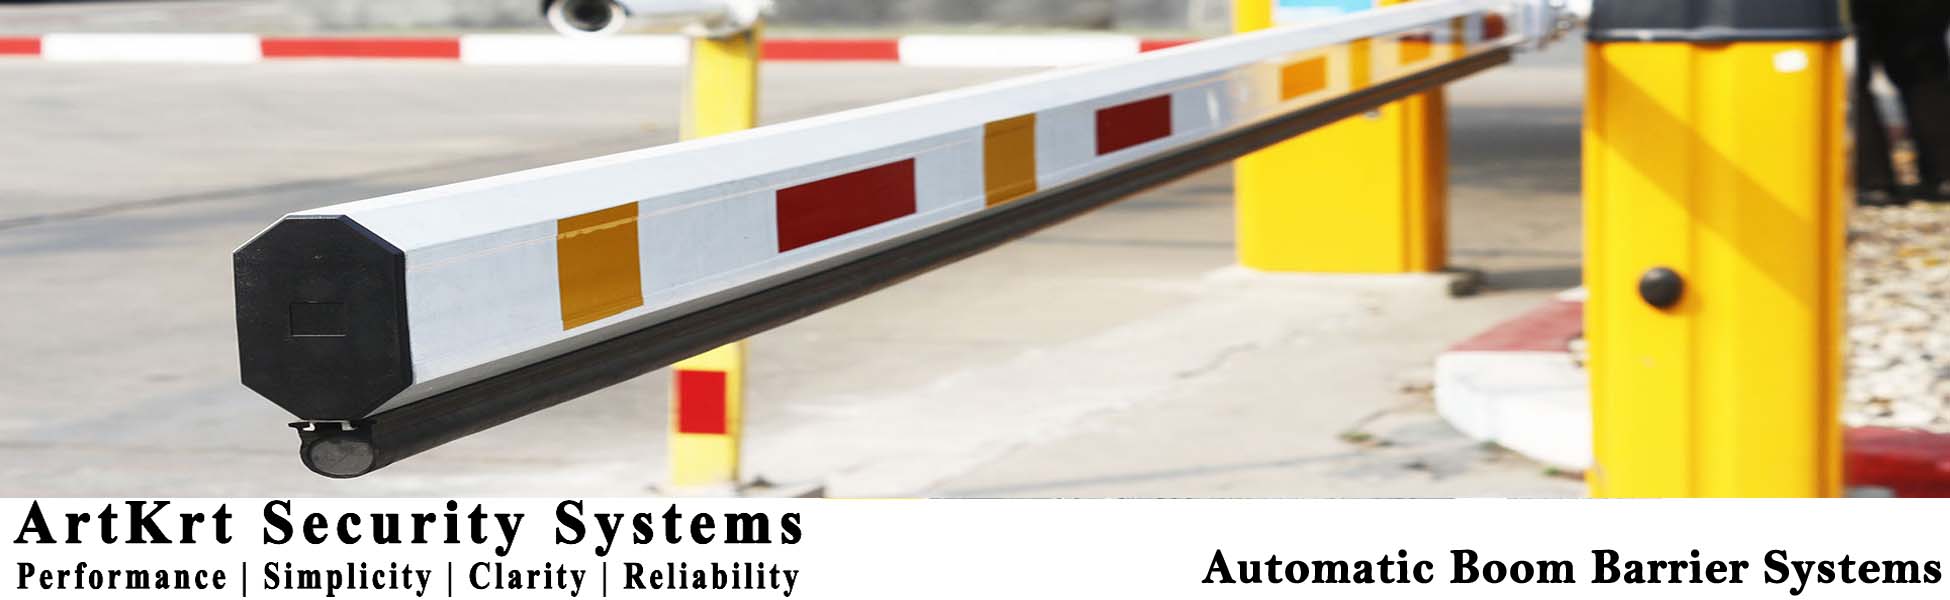 Automatic Boom Barrier Systems